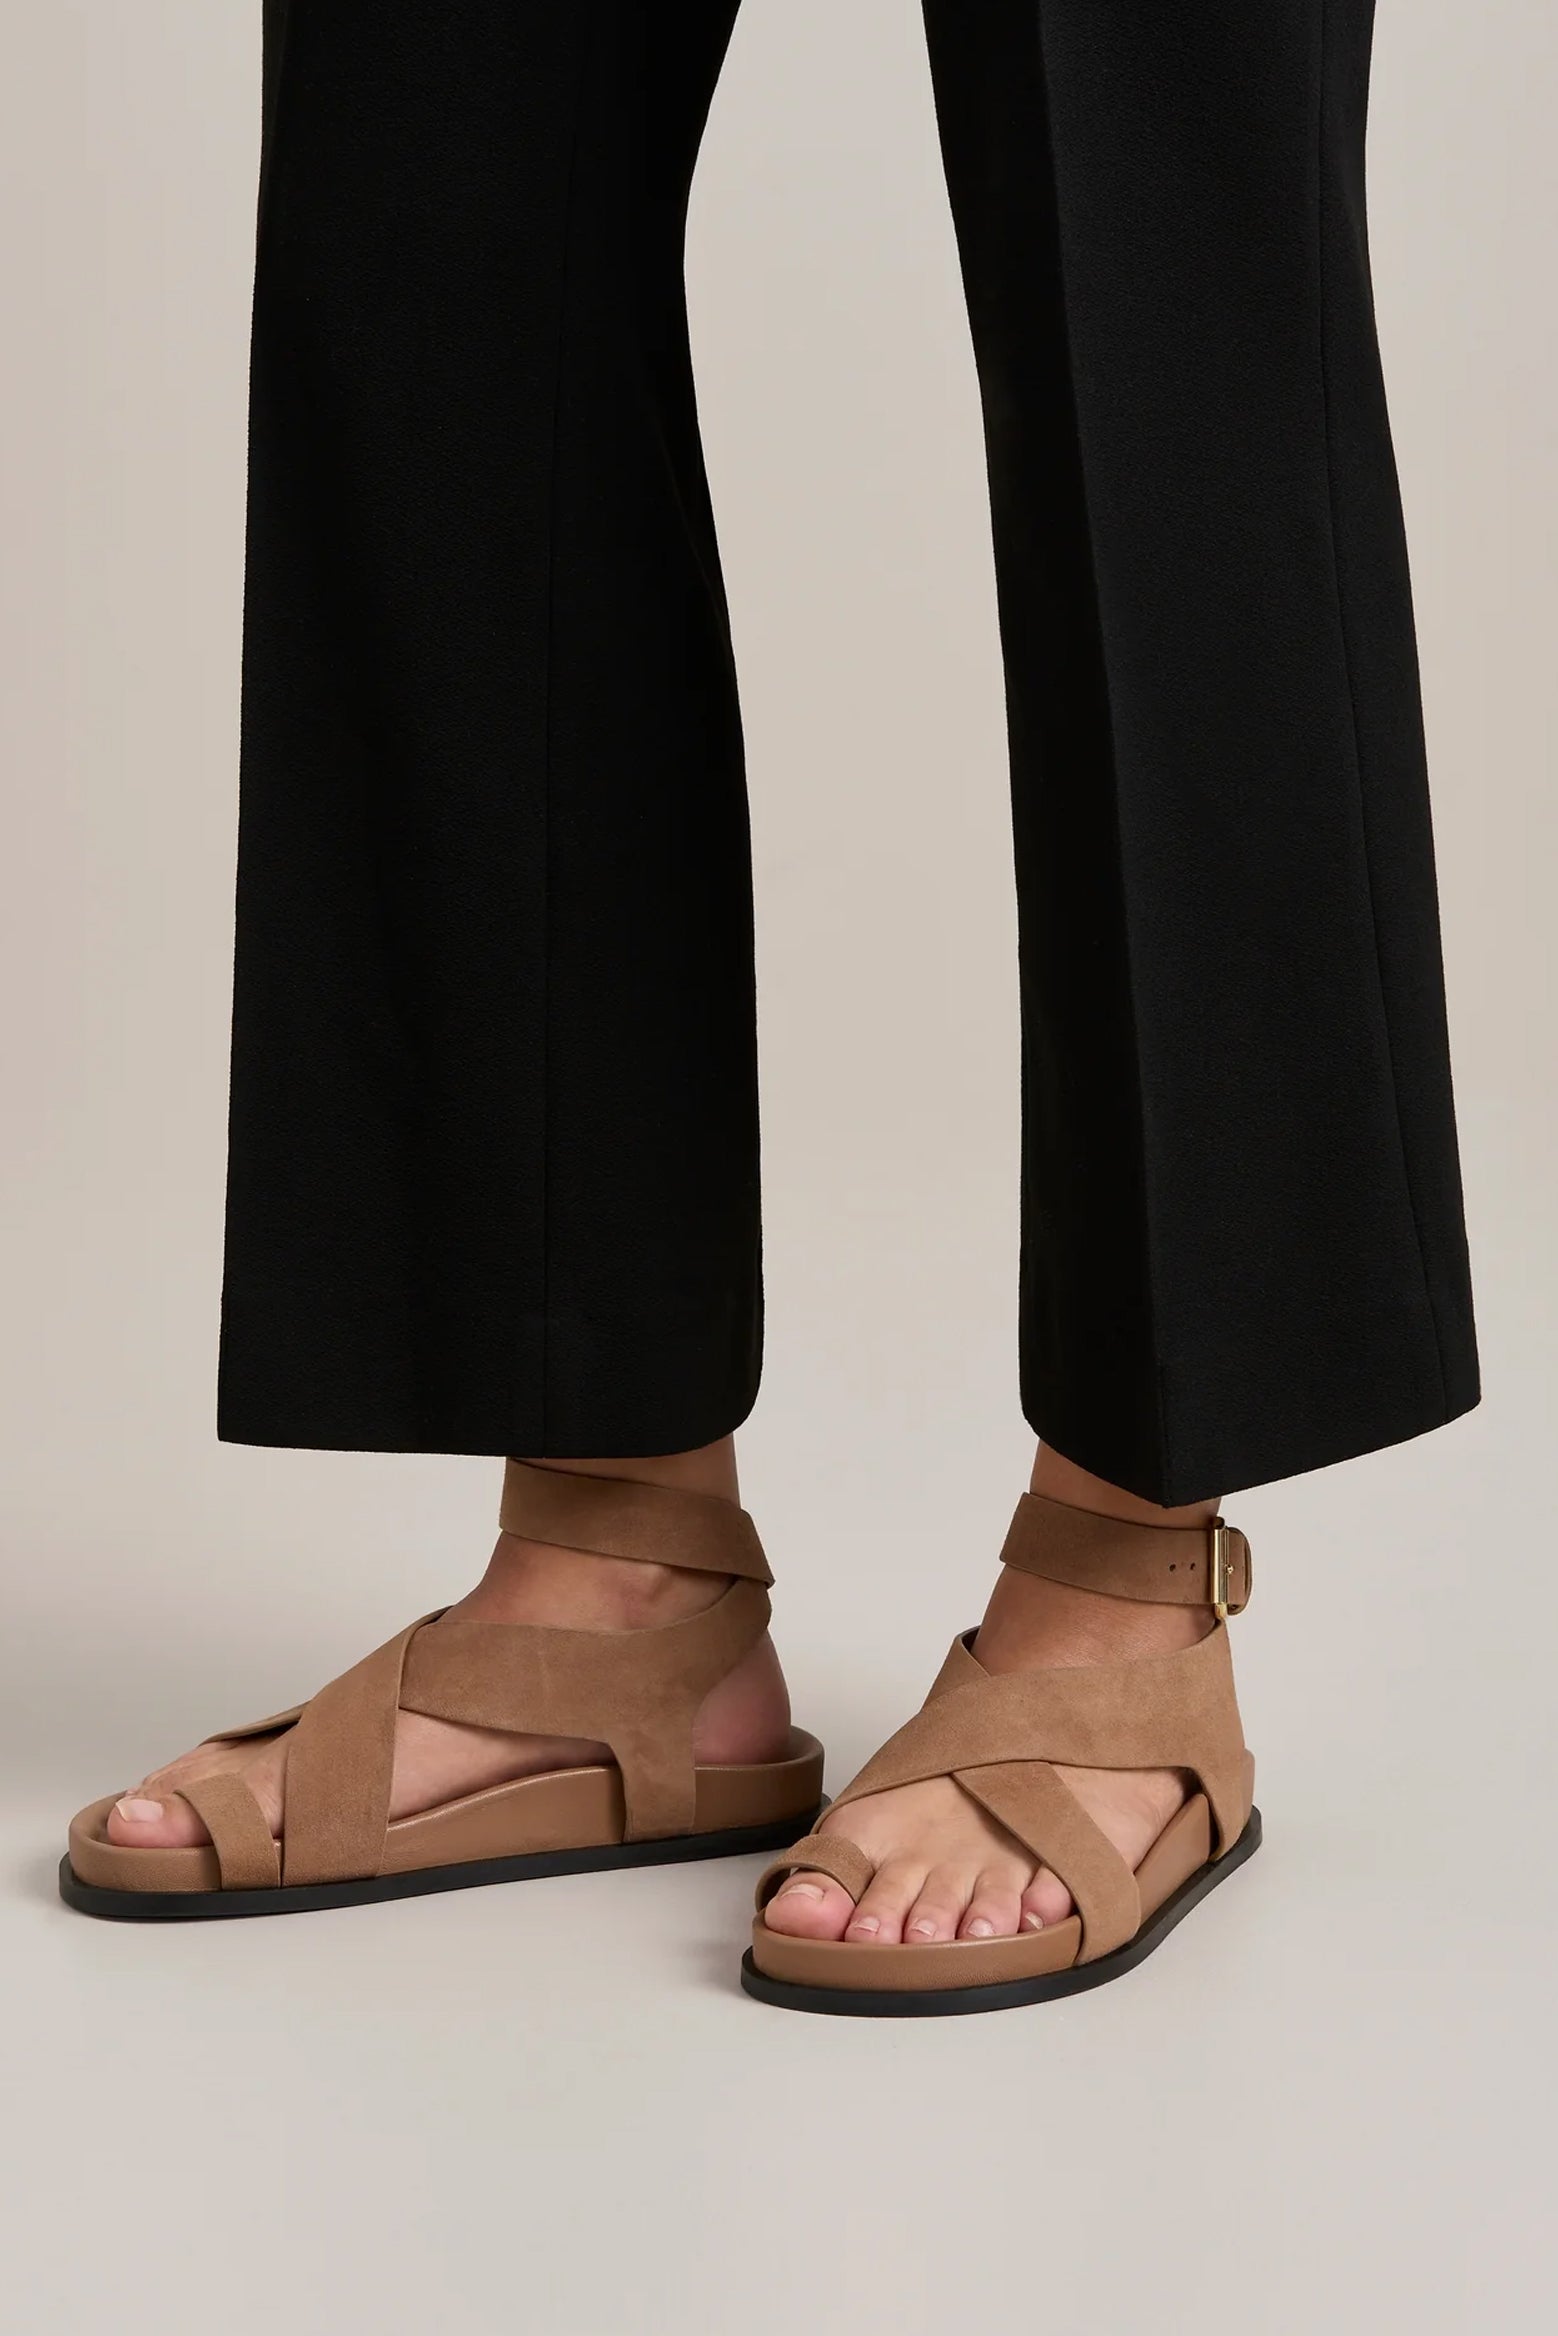 A.Emery Jalen Sandal in Nutmeg Suede available at The New Trend Australia.